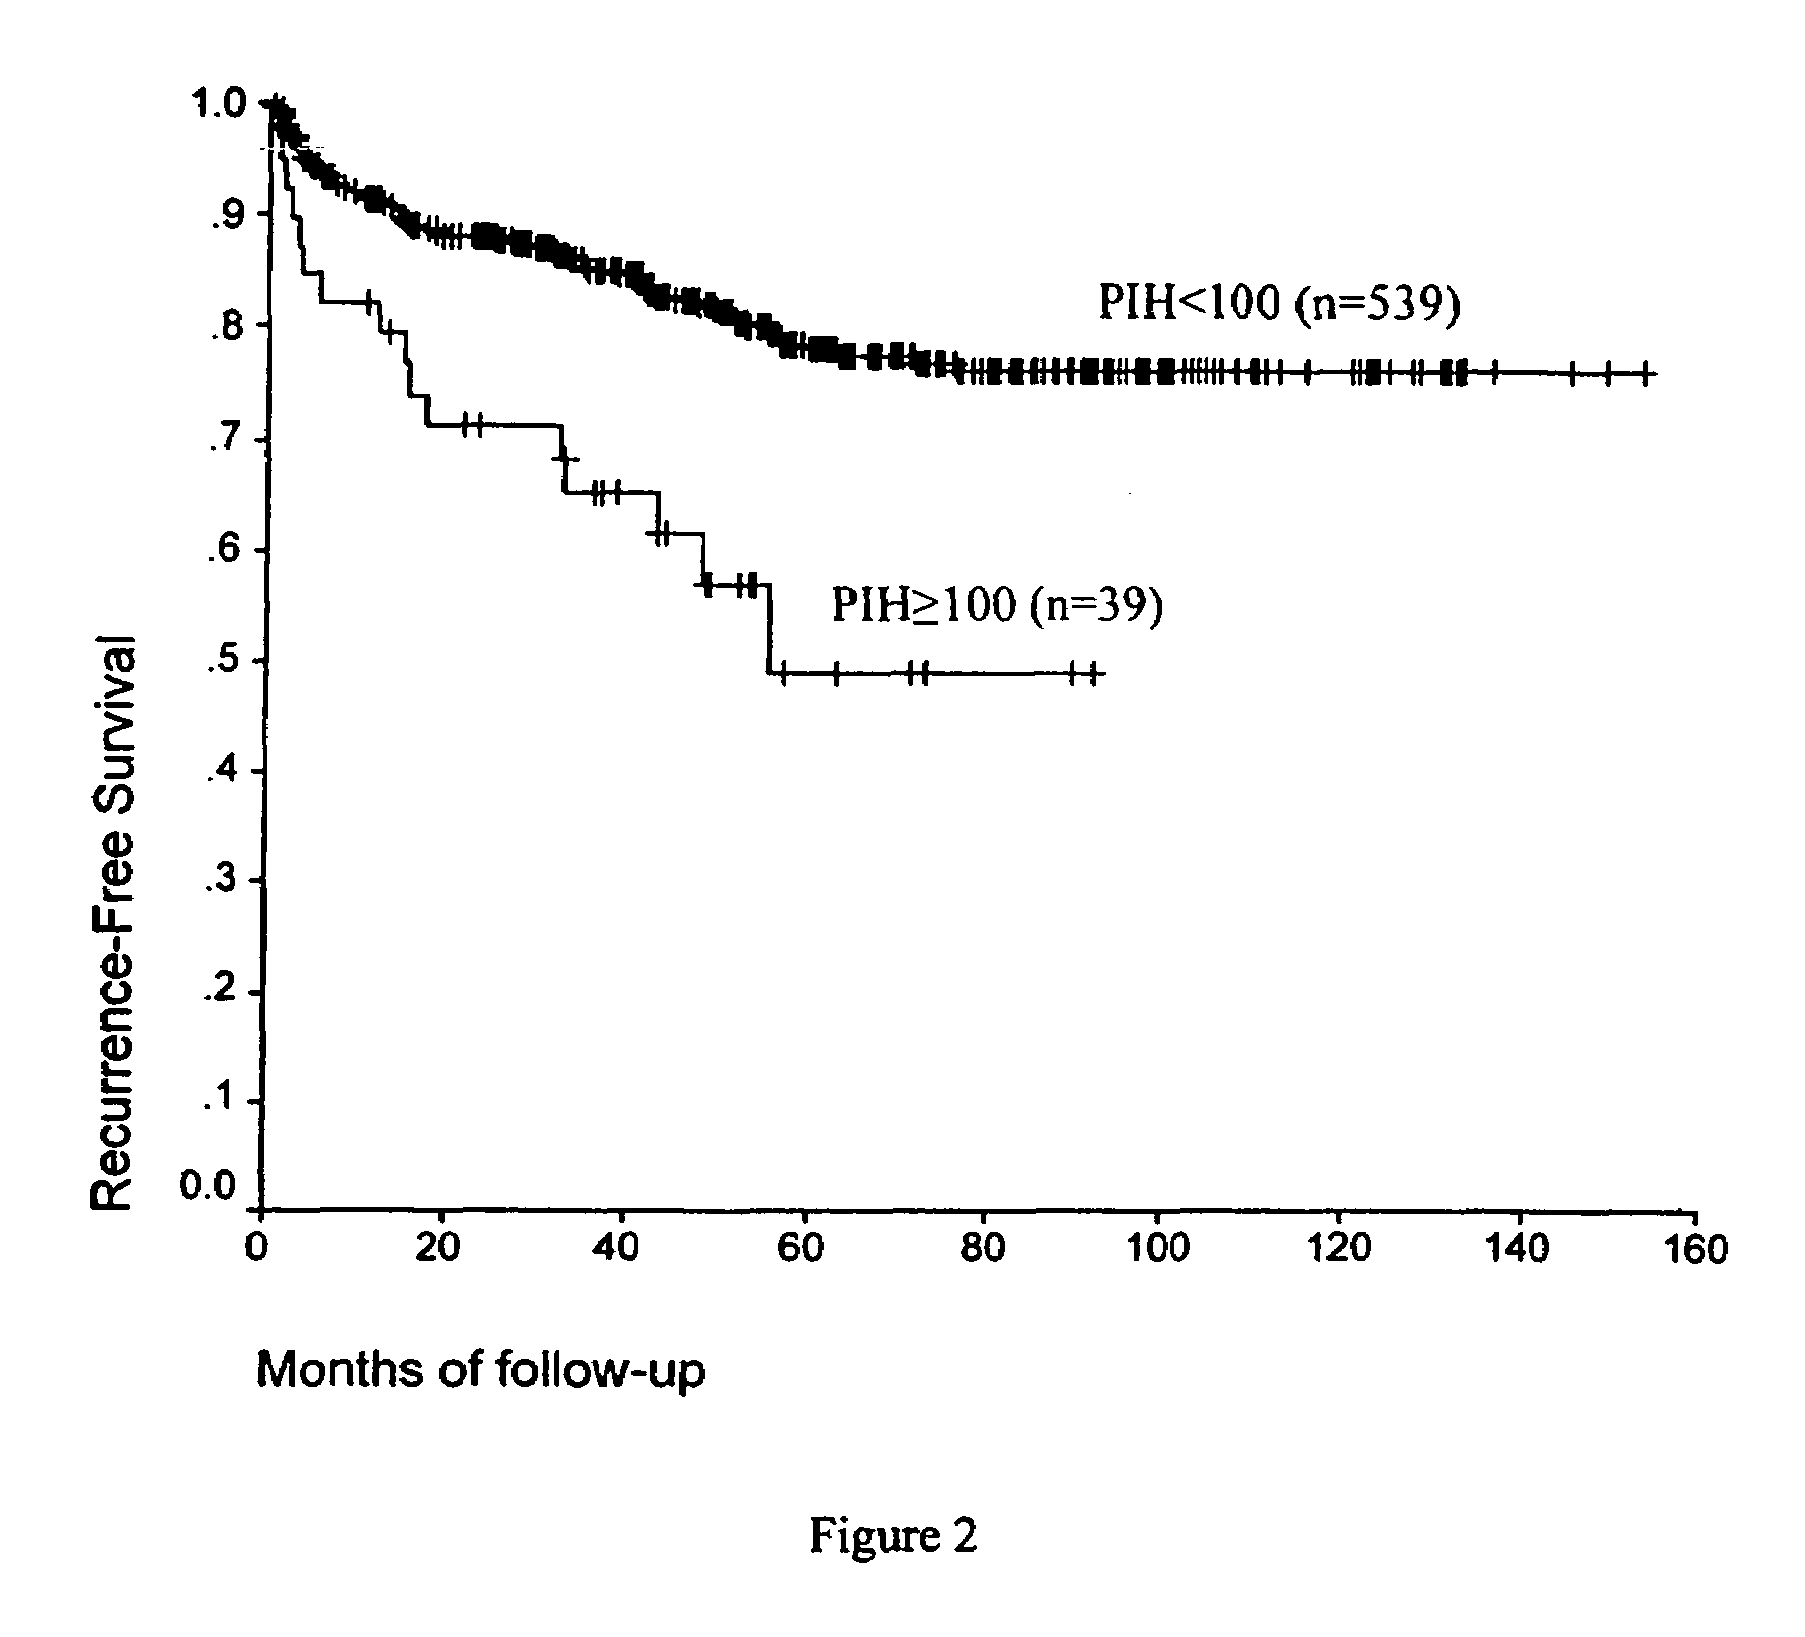 Pin 1 as a marker for prostate cancer